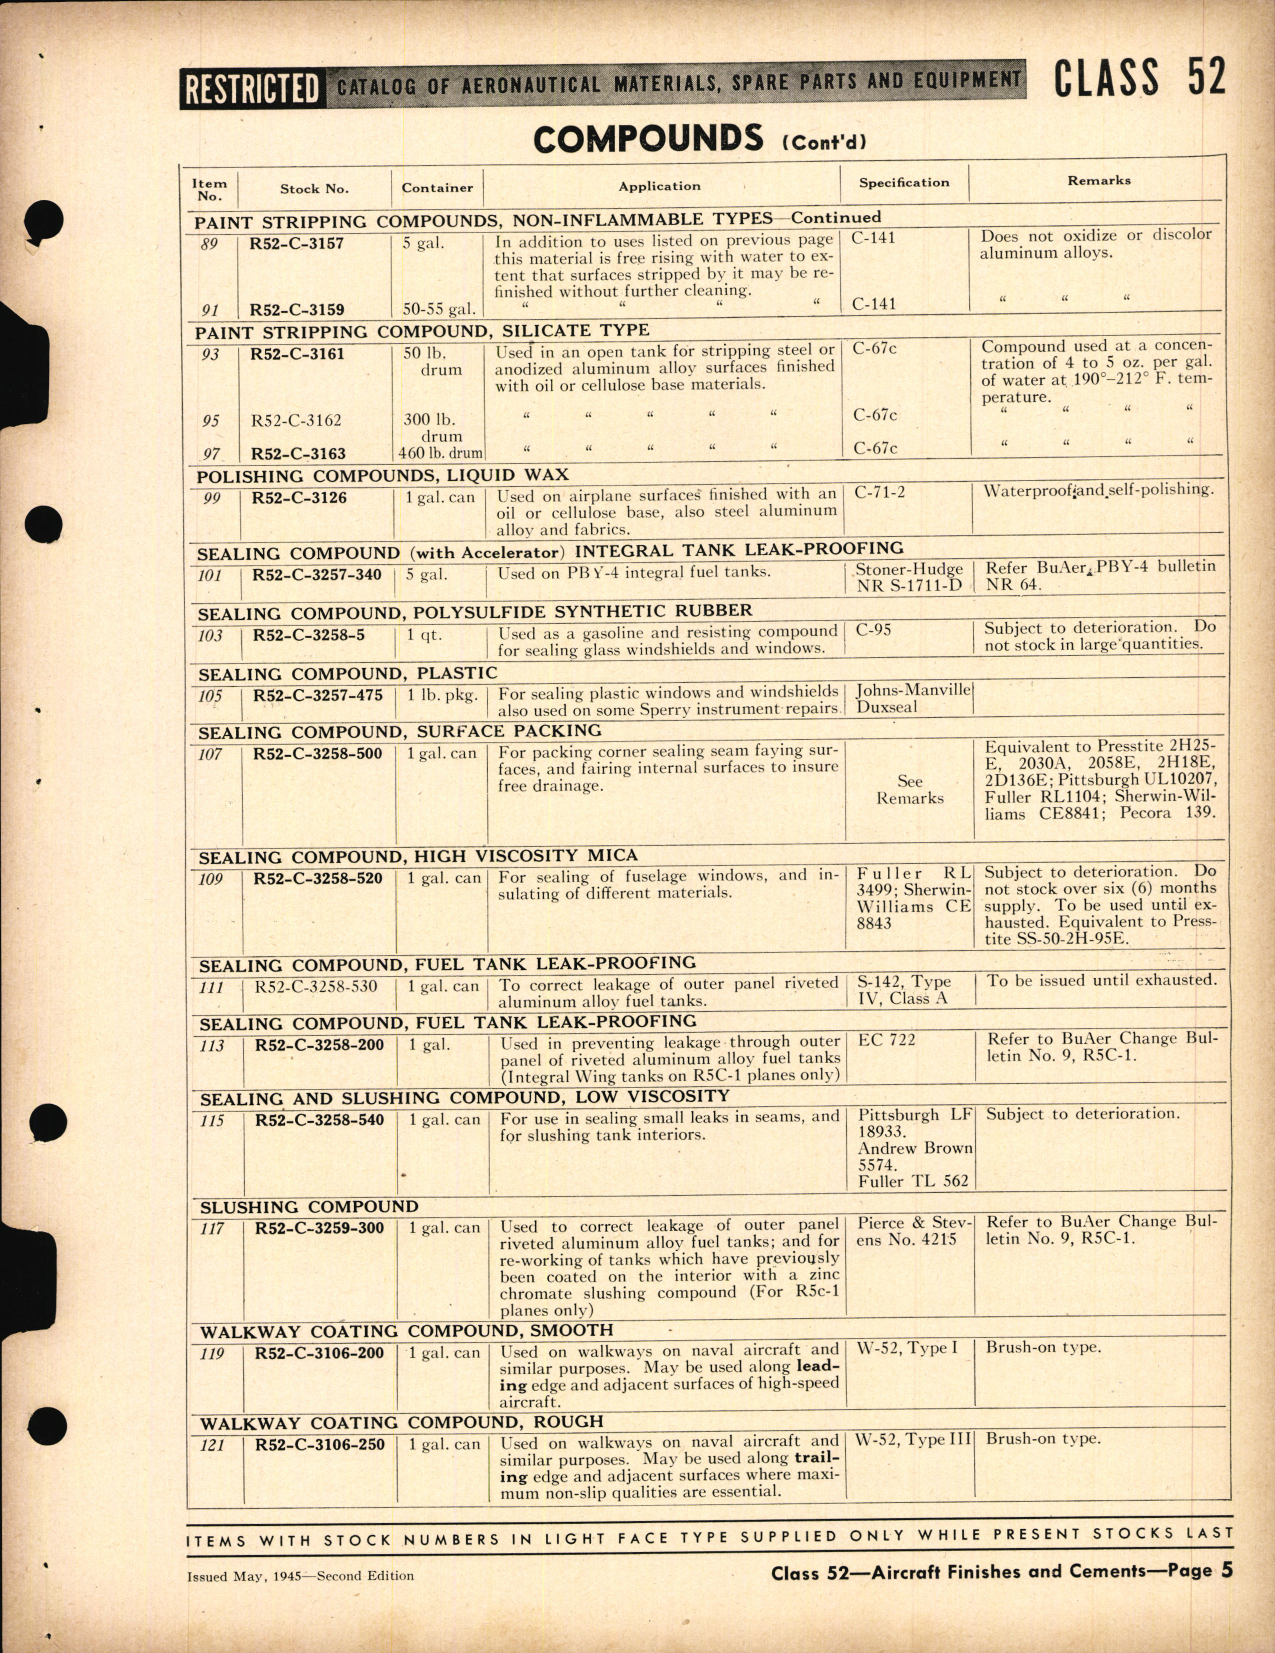 Sample page 5 from AirCorps Library document: Aircraft Finishes and Cements